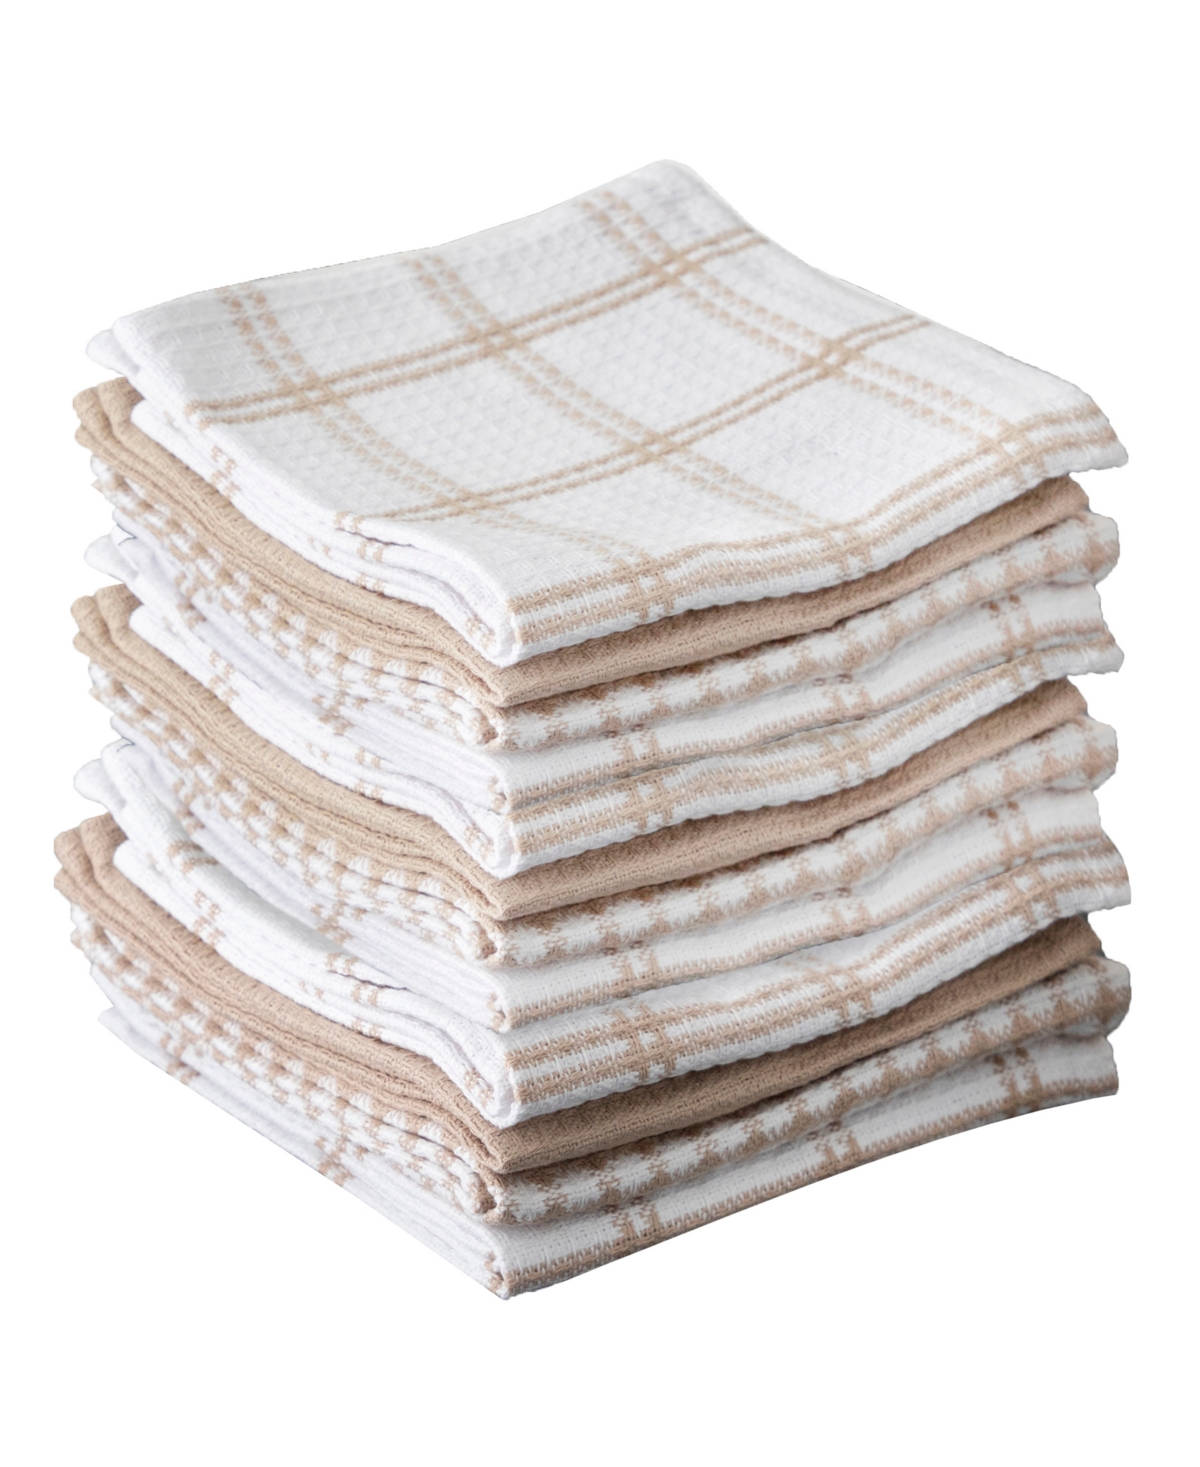 Coordinating Flat Waffle Weave Dish Cloth, Set of 12 - Neutral